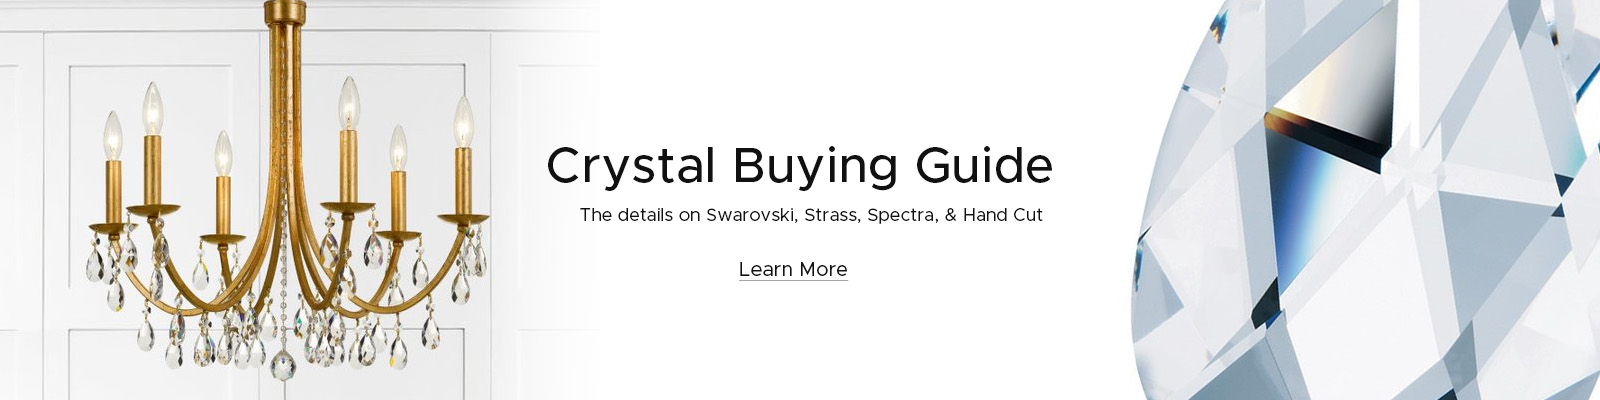 Crystal Guide